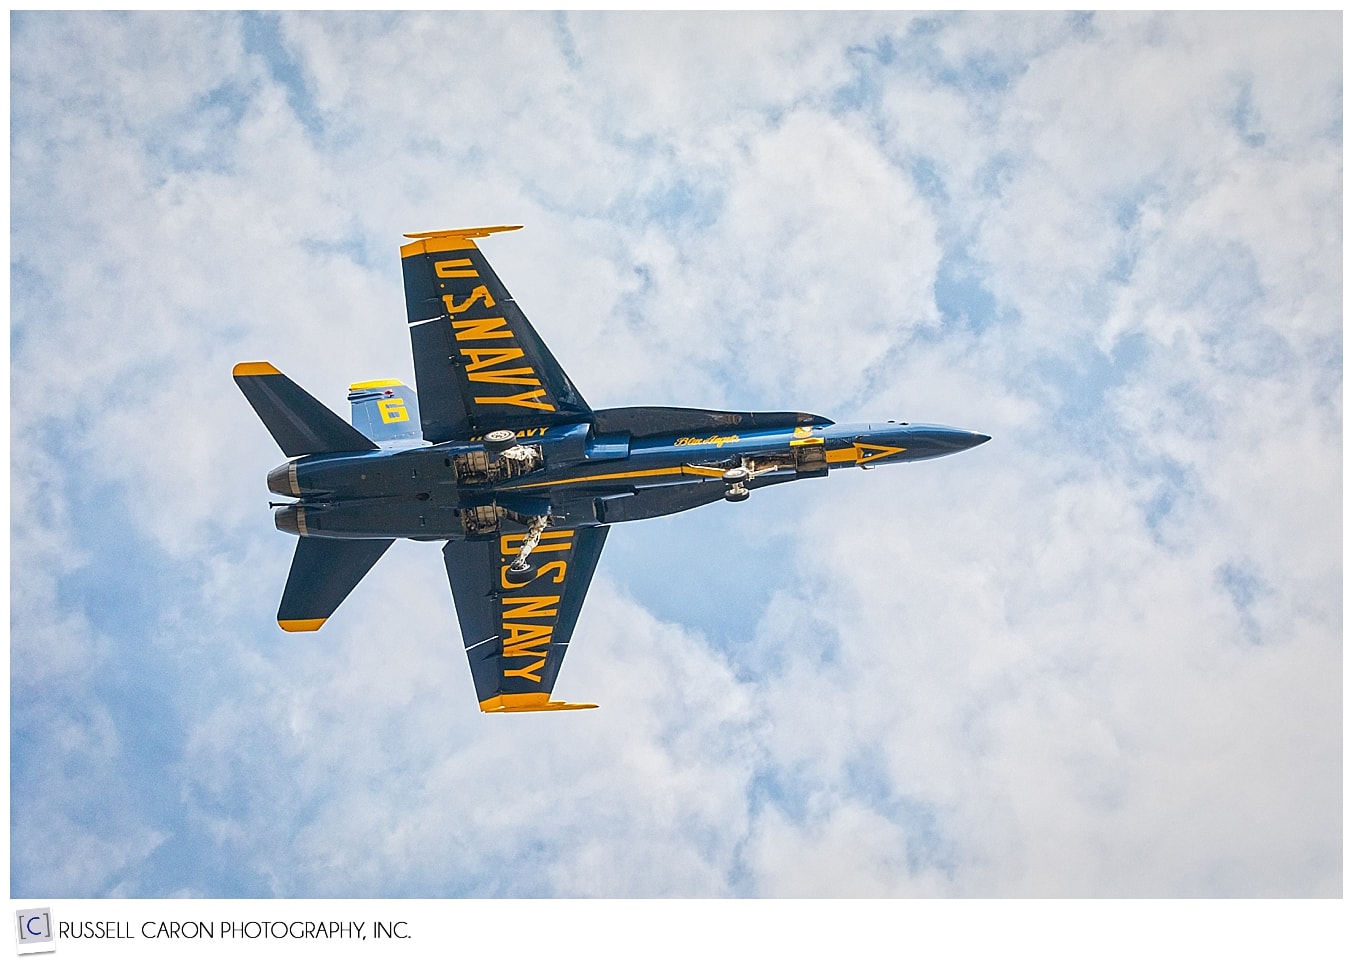 A US Navy Blue angel coming in for a landing during the US Navy Blue Angels Air Show